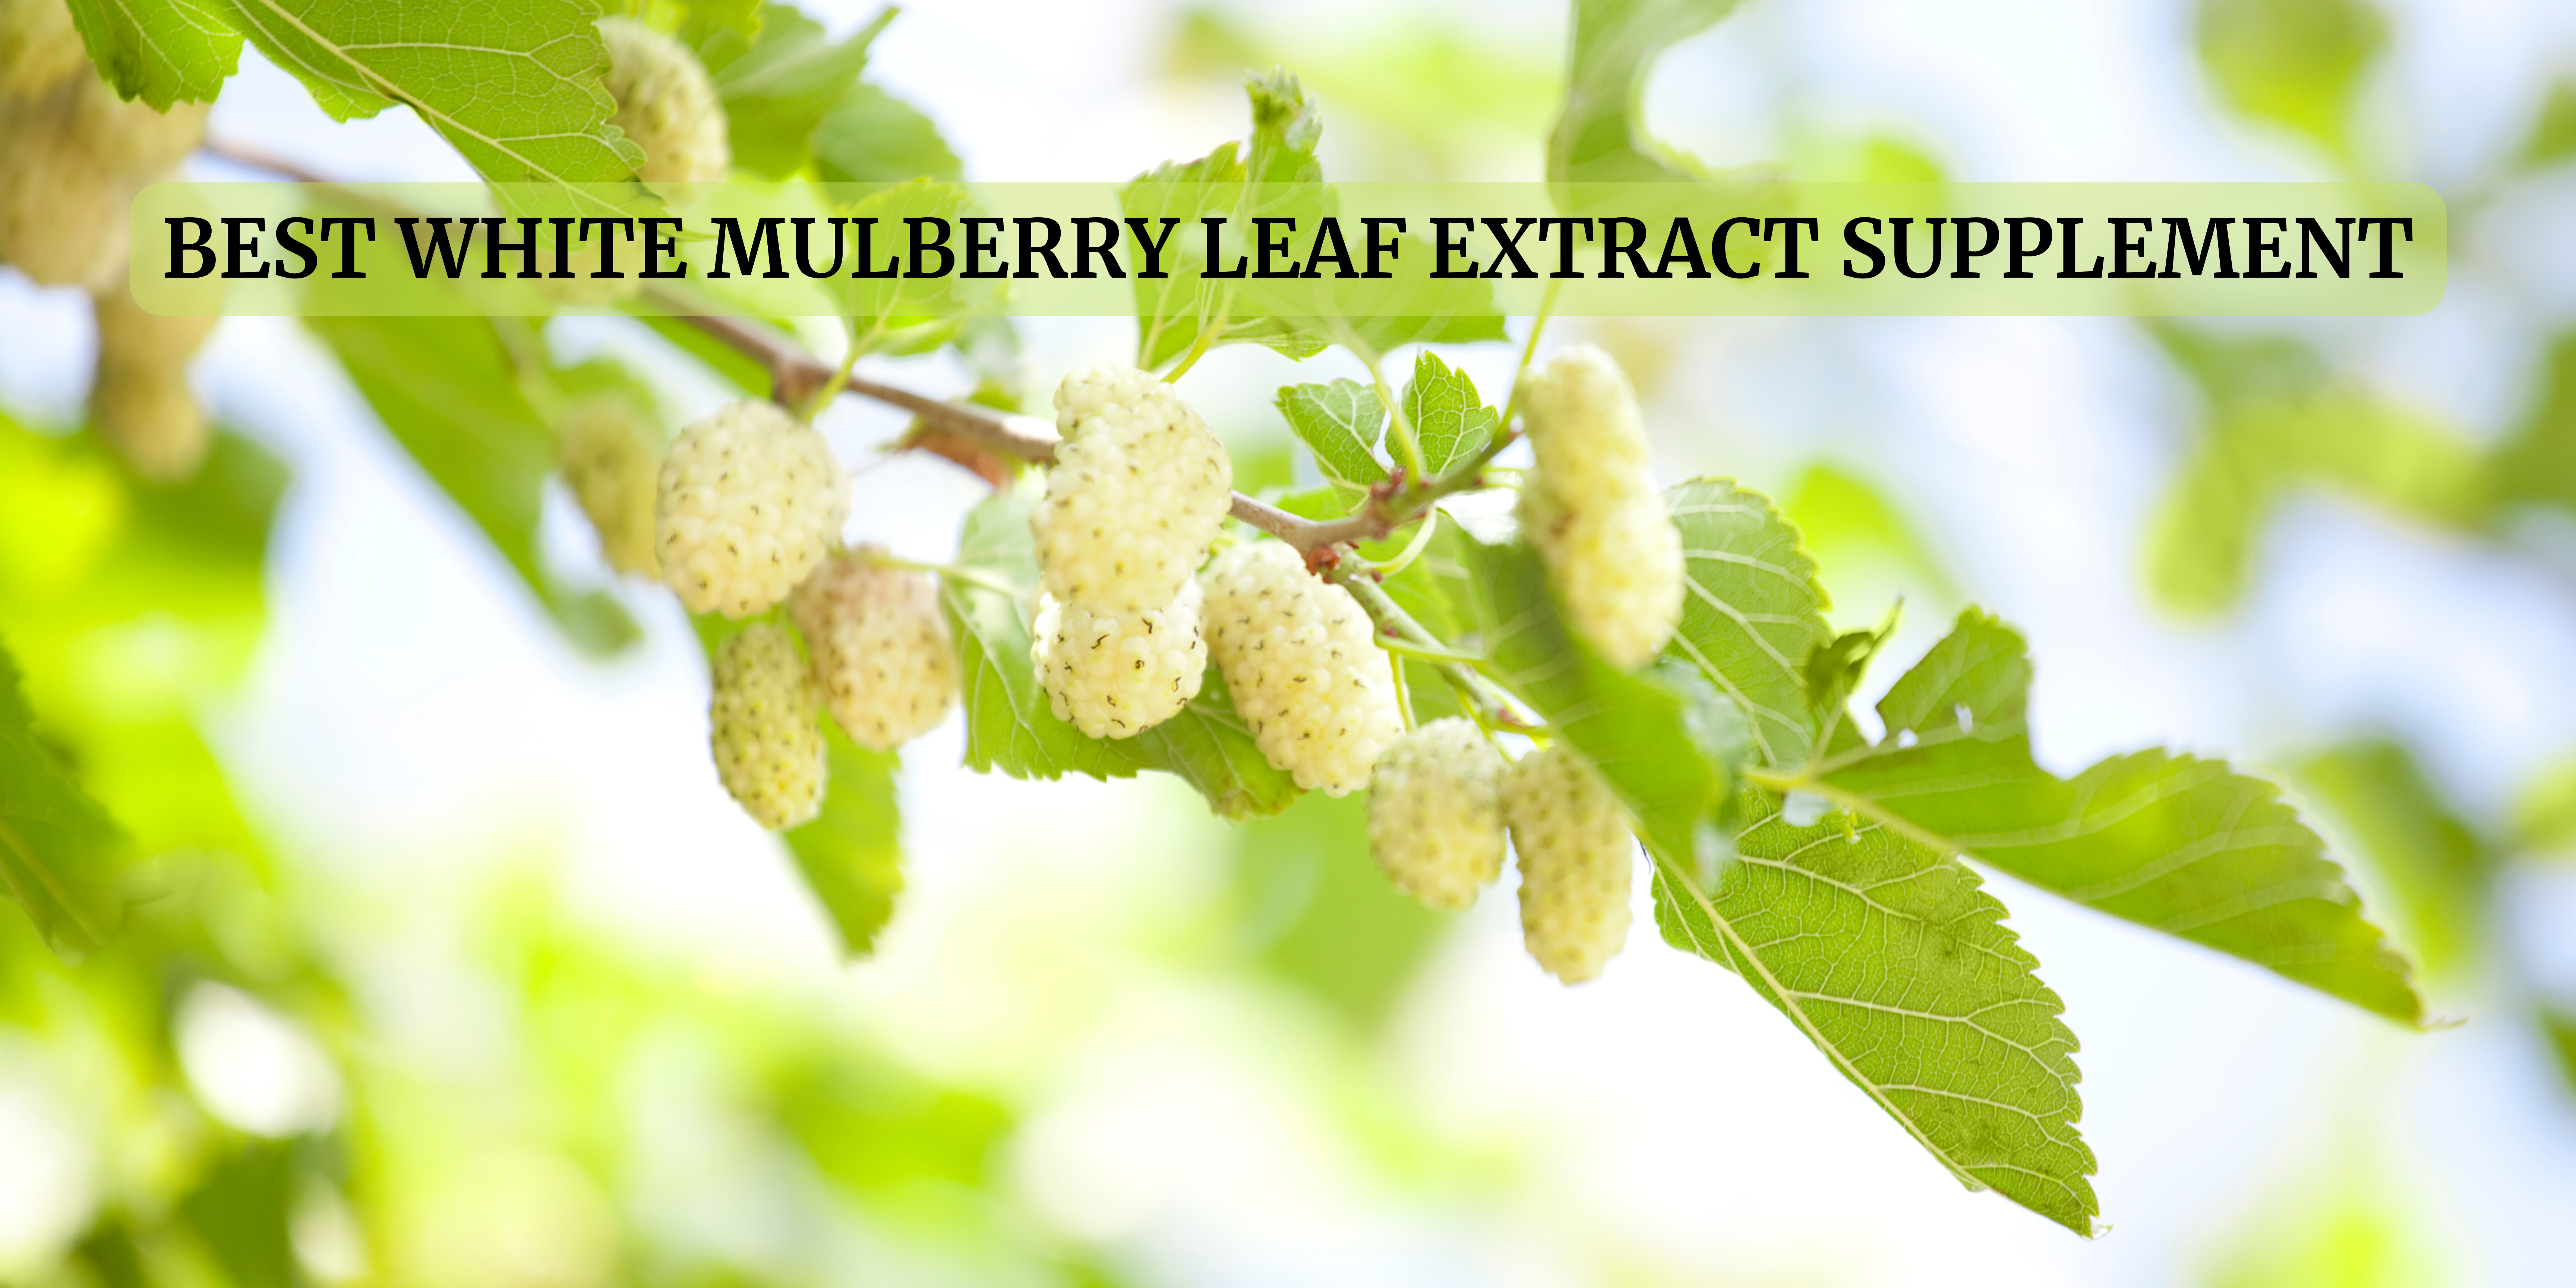 white mulberry leaf extract supplement in India